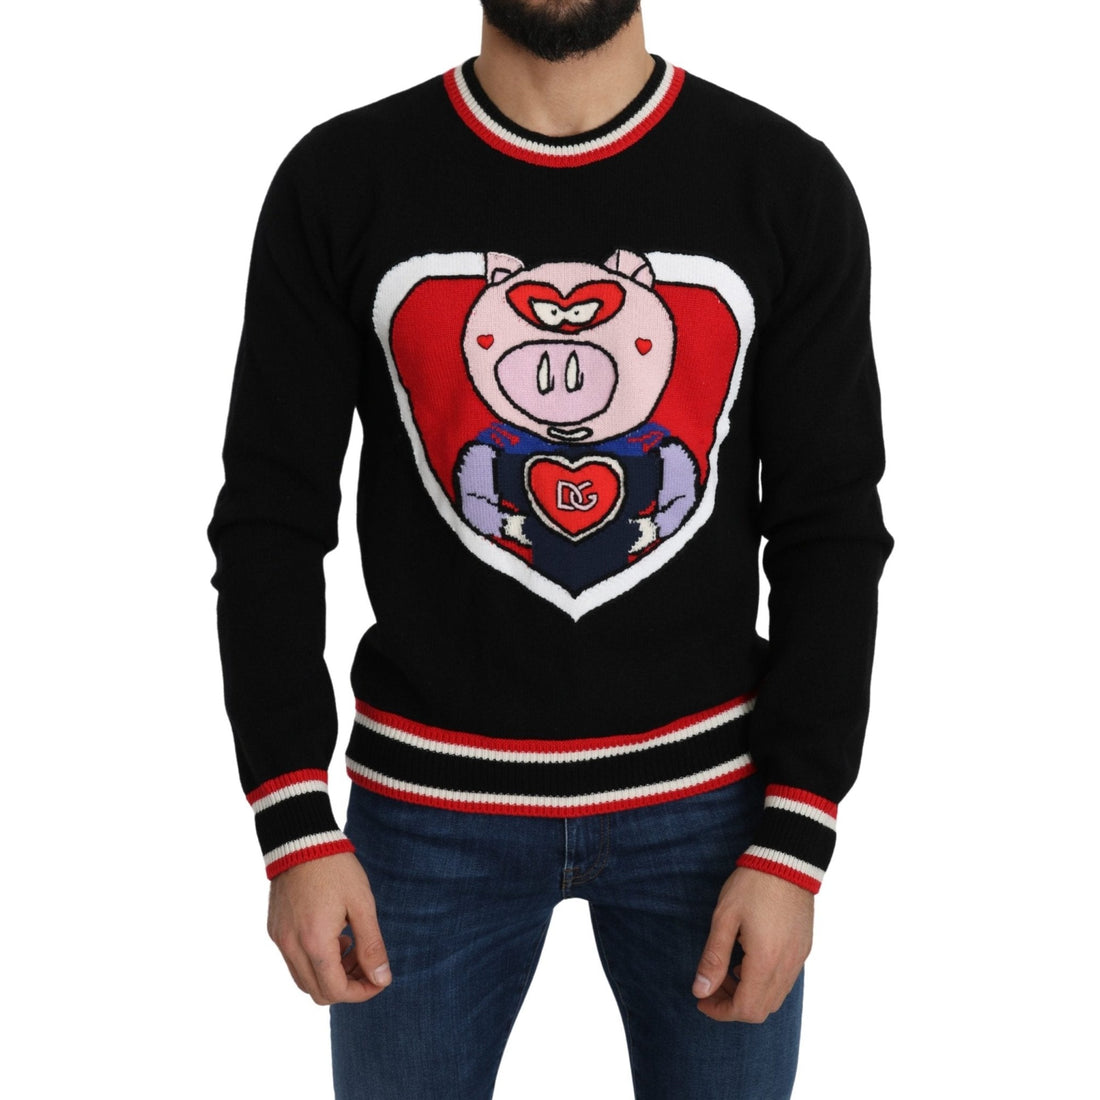 Dolce & Gabbana Black Cashmere Pig of the Year Pullover Sweater - Paris Deluxe